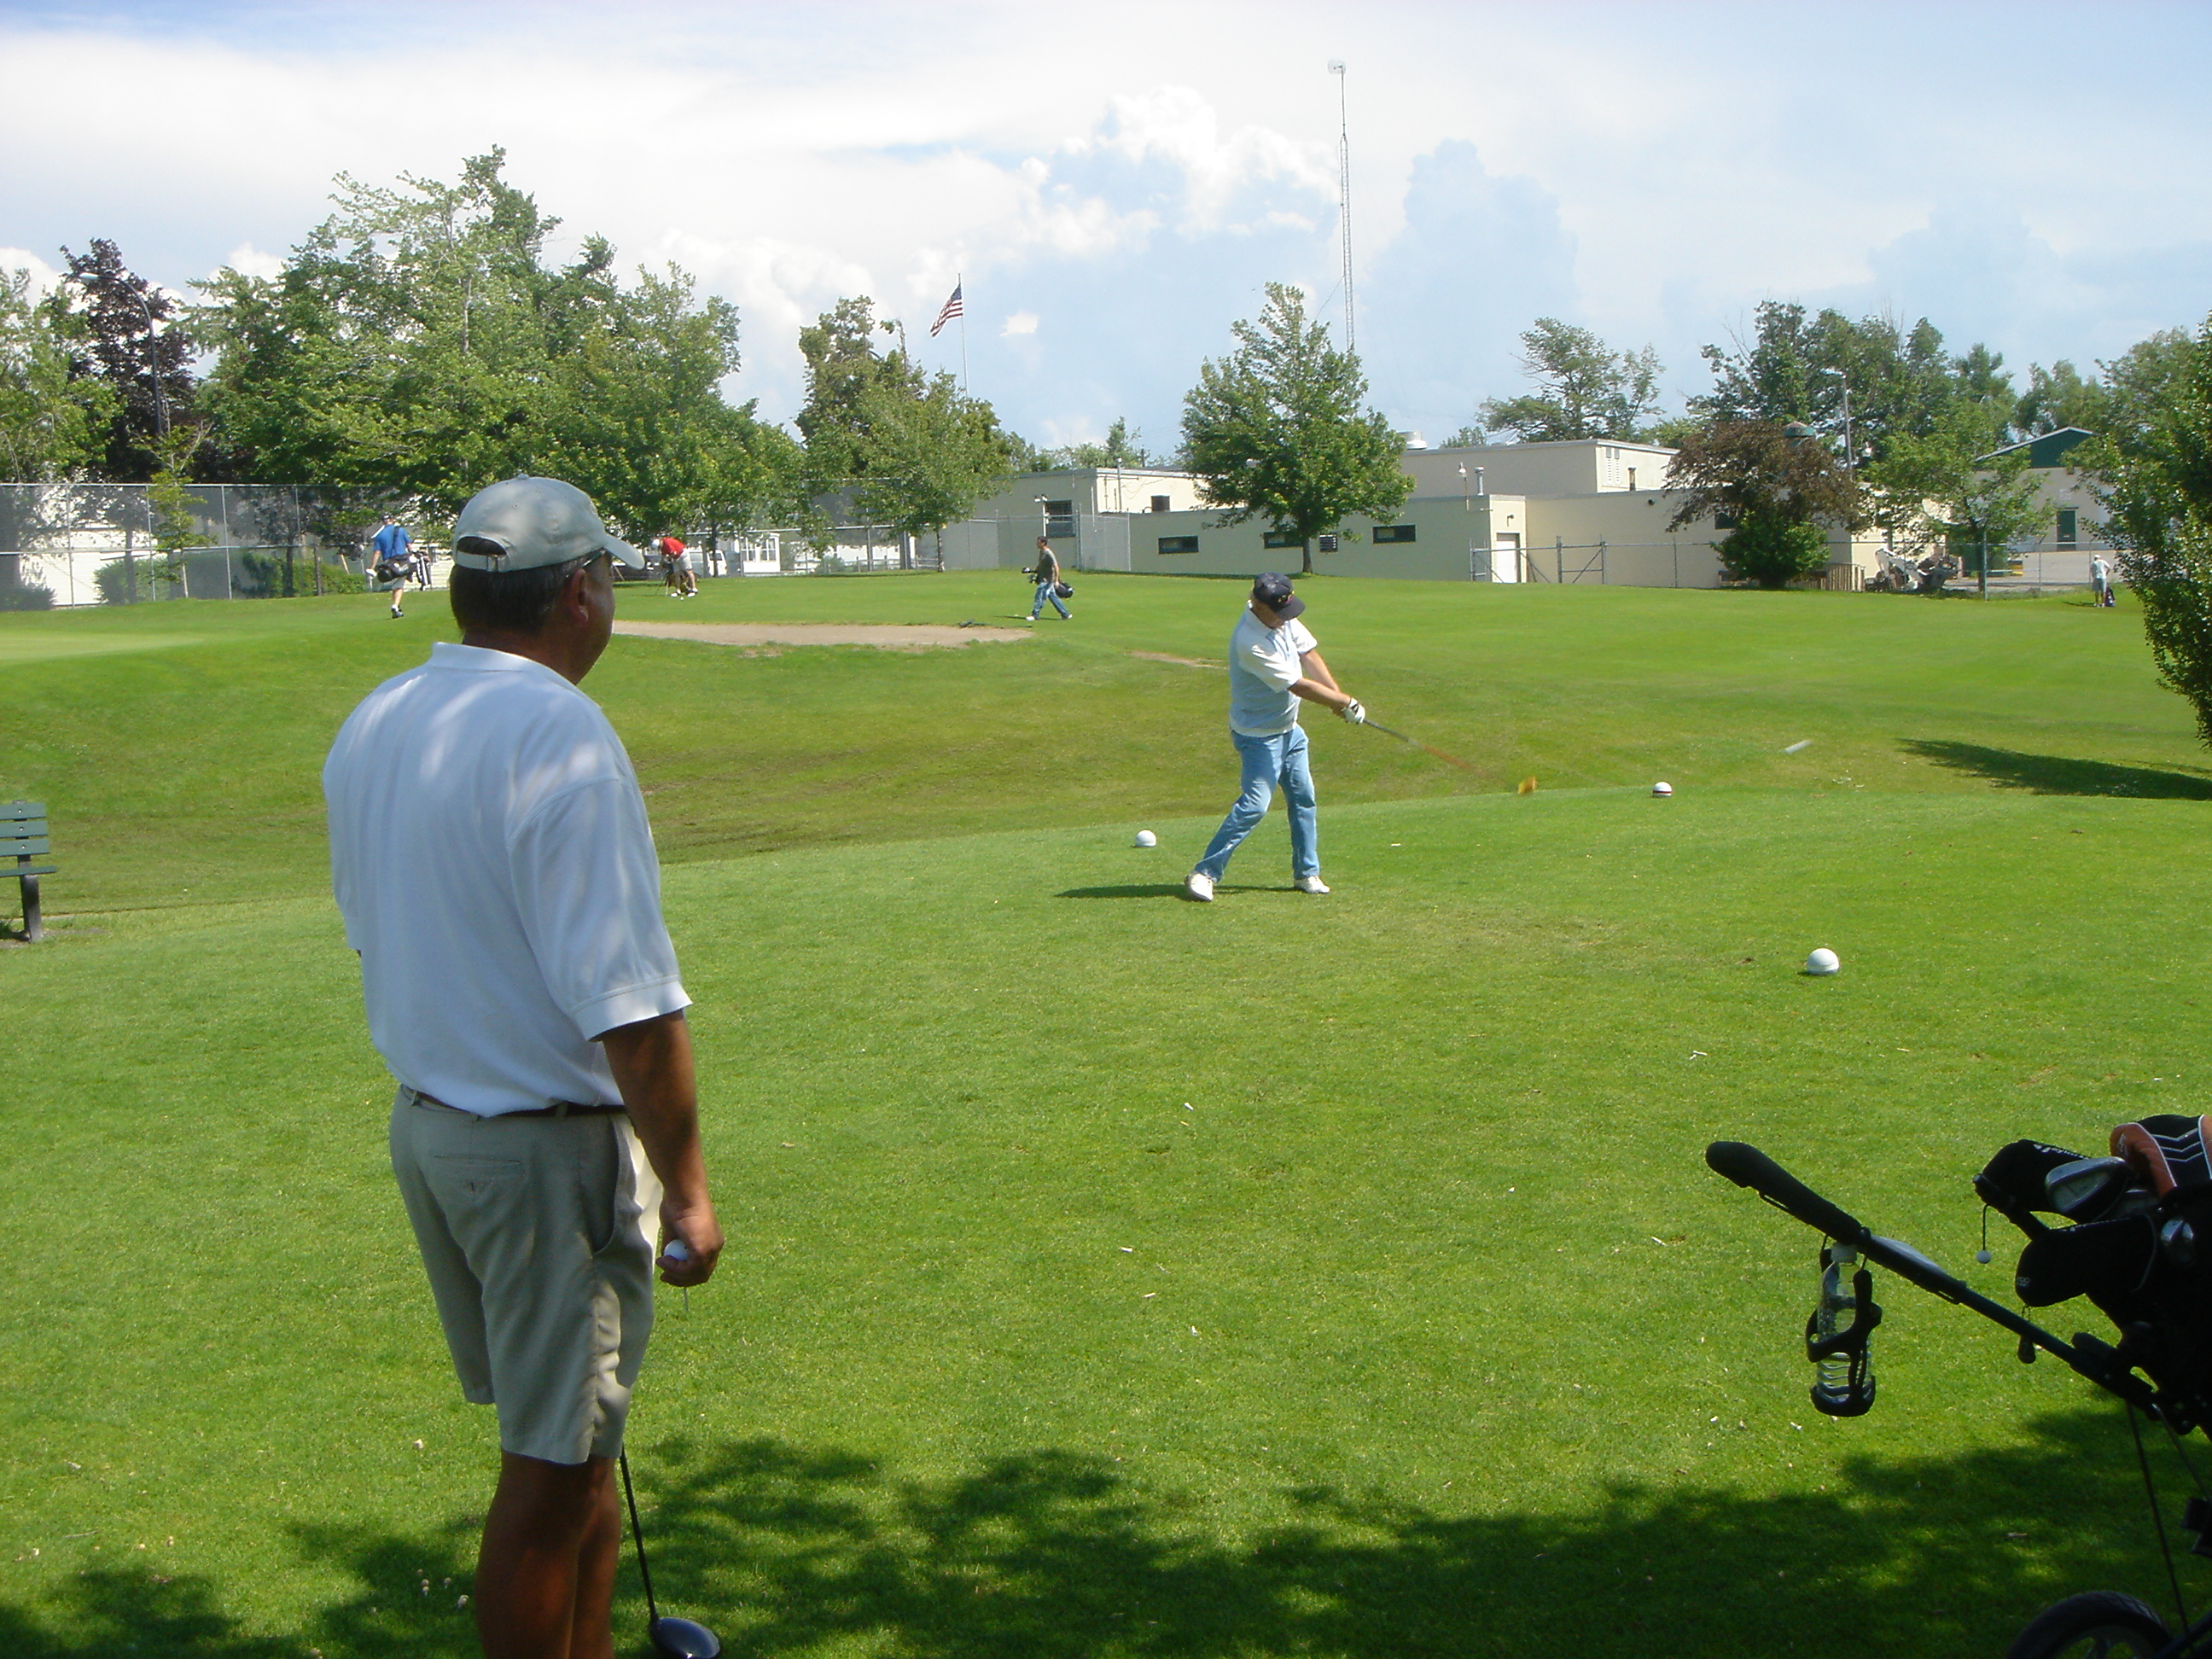 80 Year Old Club Icon Ed "Smitty" Smith Tees off on 18th Hole with his Persimmon Driver while Jim Schreck Watches During Their 21-Hole President's Cup Match on June 22, 2008